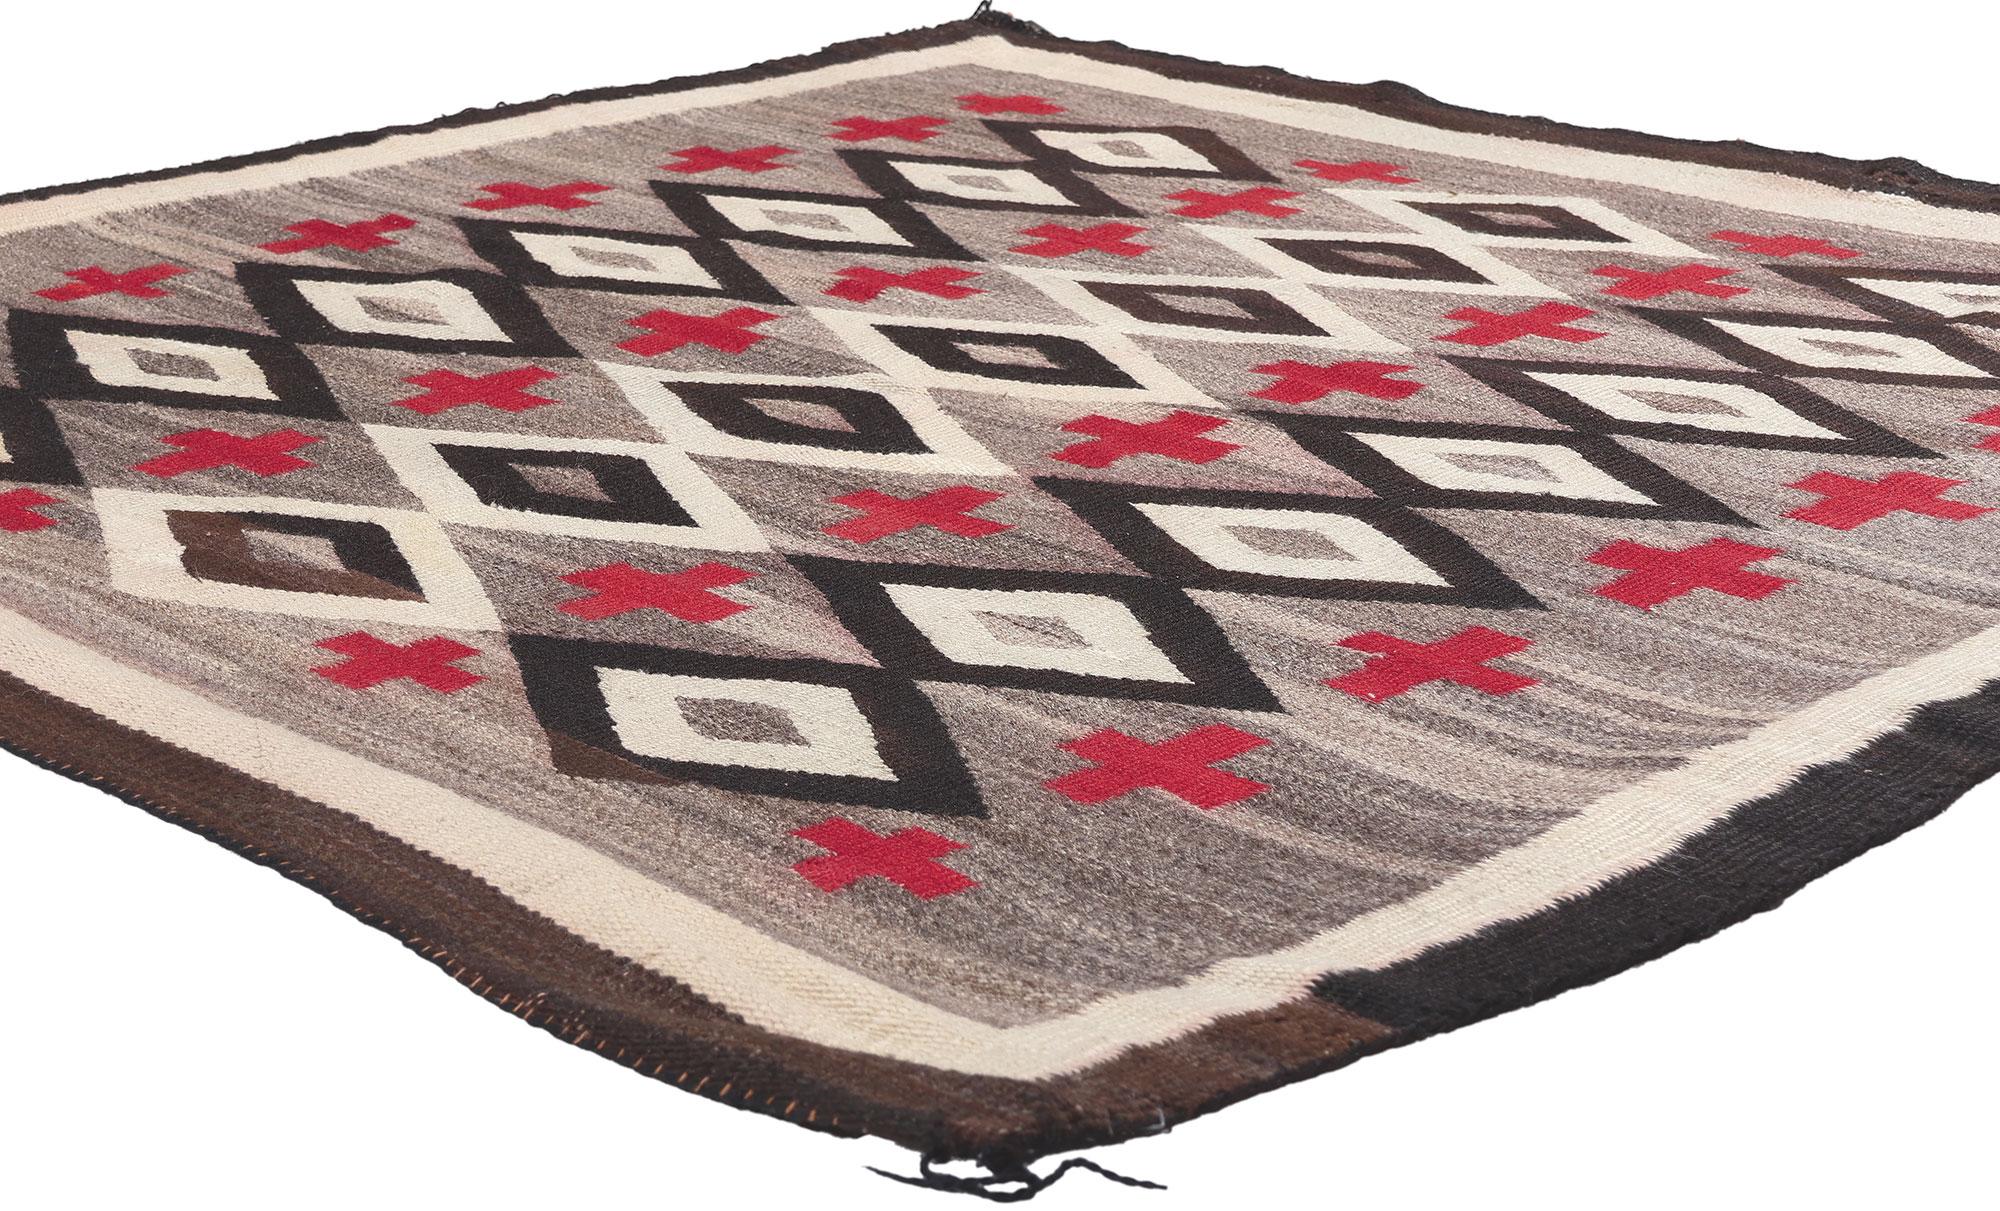 78559 Antique Ganado Navajo Rug, 05'01 x 05'00. 
Emanating Native American culture with incredible detail and texture, this handwoven antique Navajo Ganado rug is a captivating vision of woven beauty. The eye-catching Southwest design and earthy